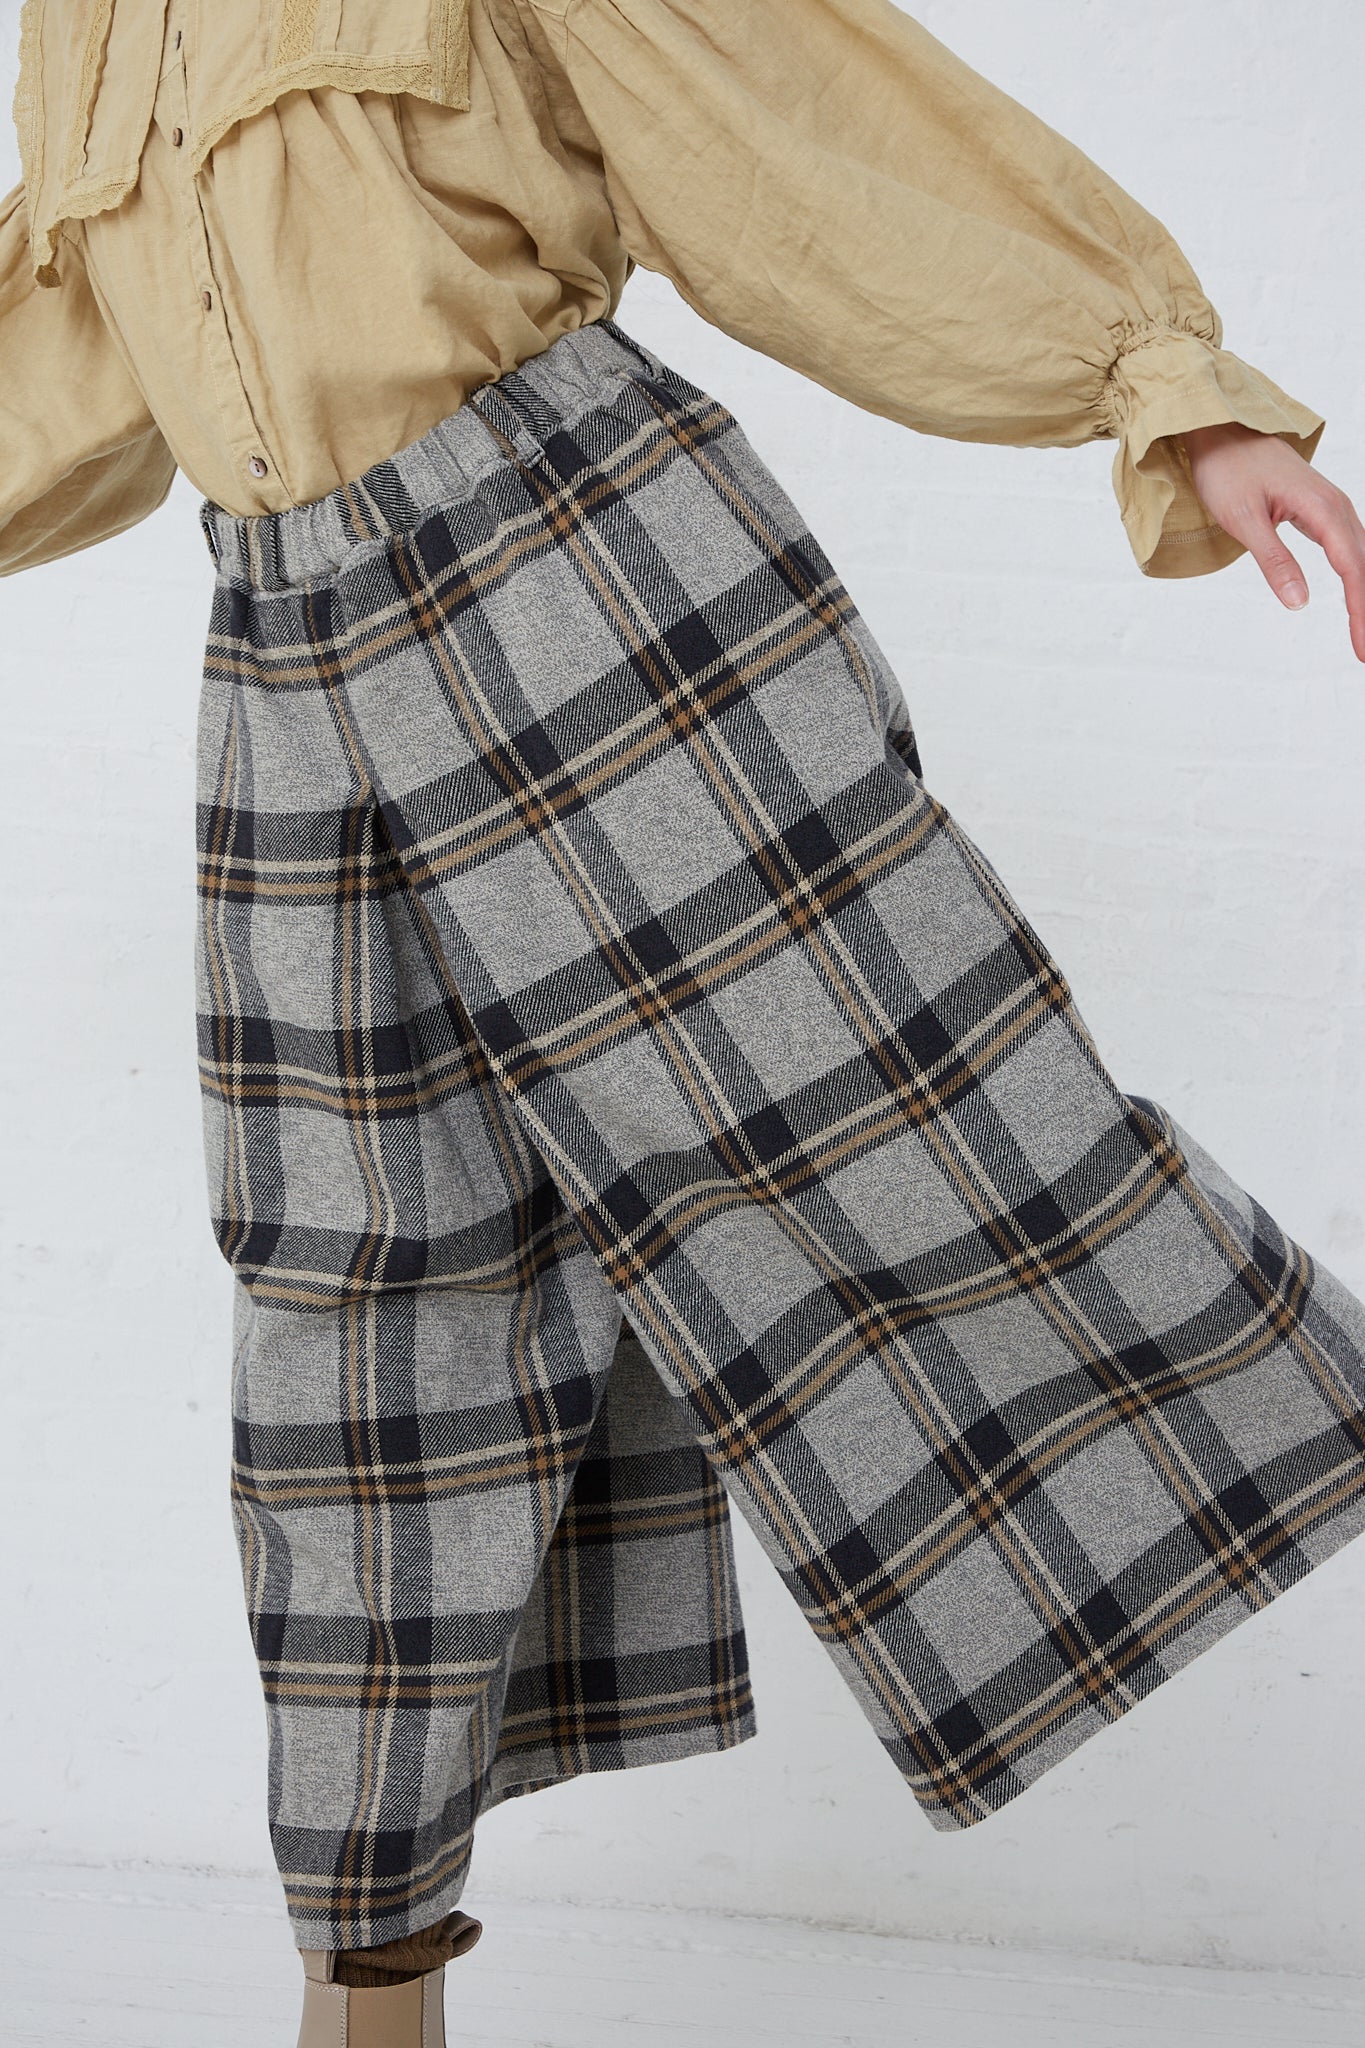 A woman wearing a "Cotton Heavy Twill Plaid Wide Leg Pant in Navy" made by nest Robe and paired with tan boots.